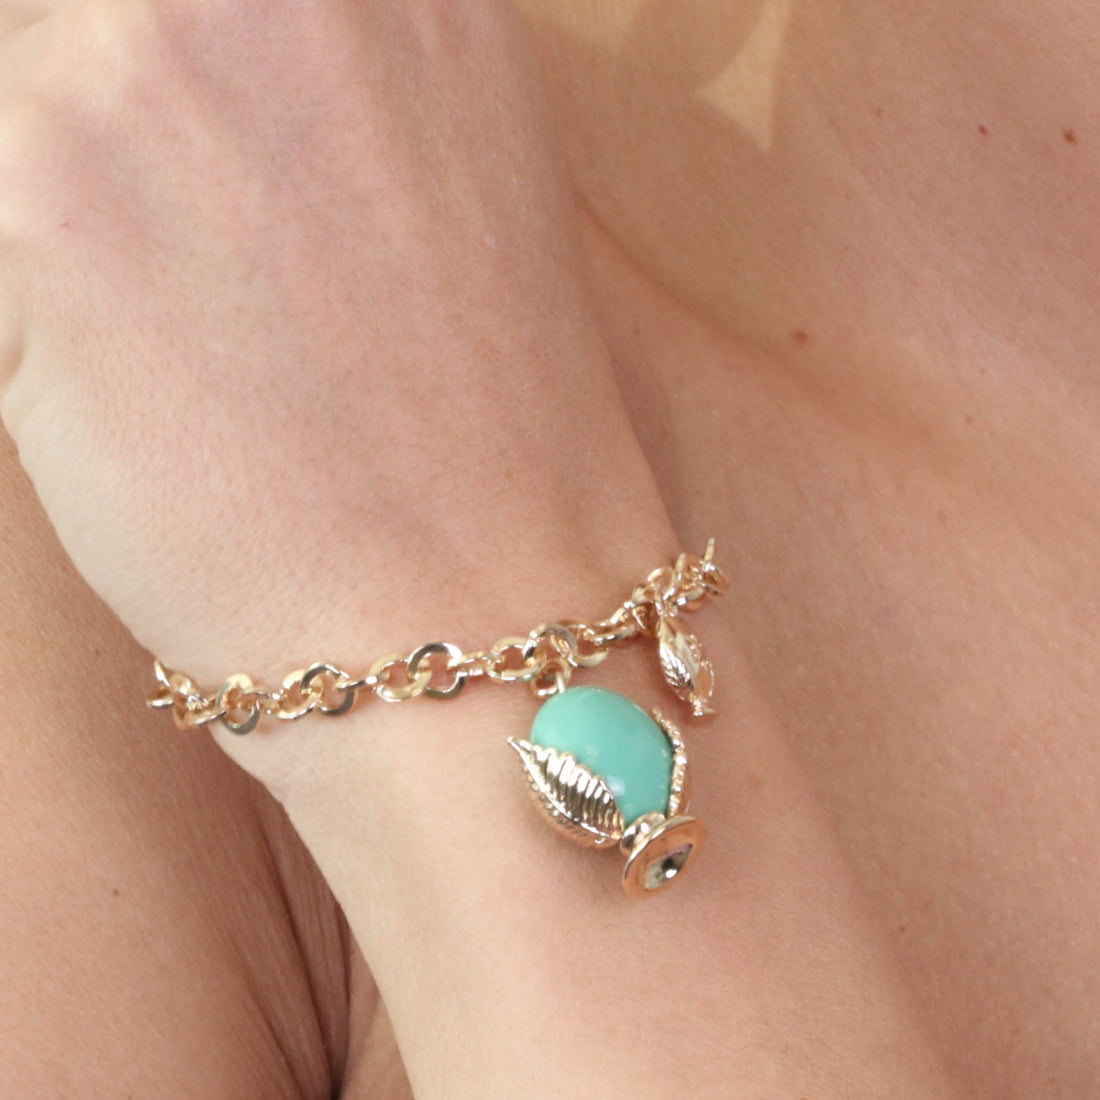 Metal bracelet with pendant Apulian pumo, embellished with green enamel and lateral mini pumo